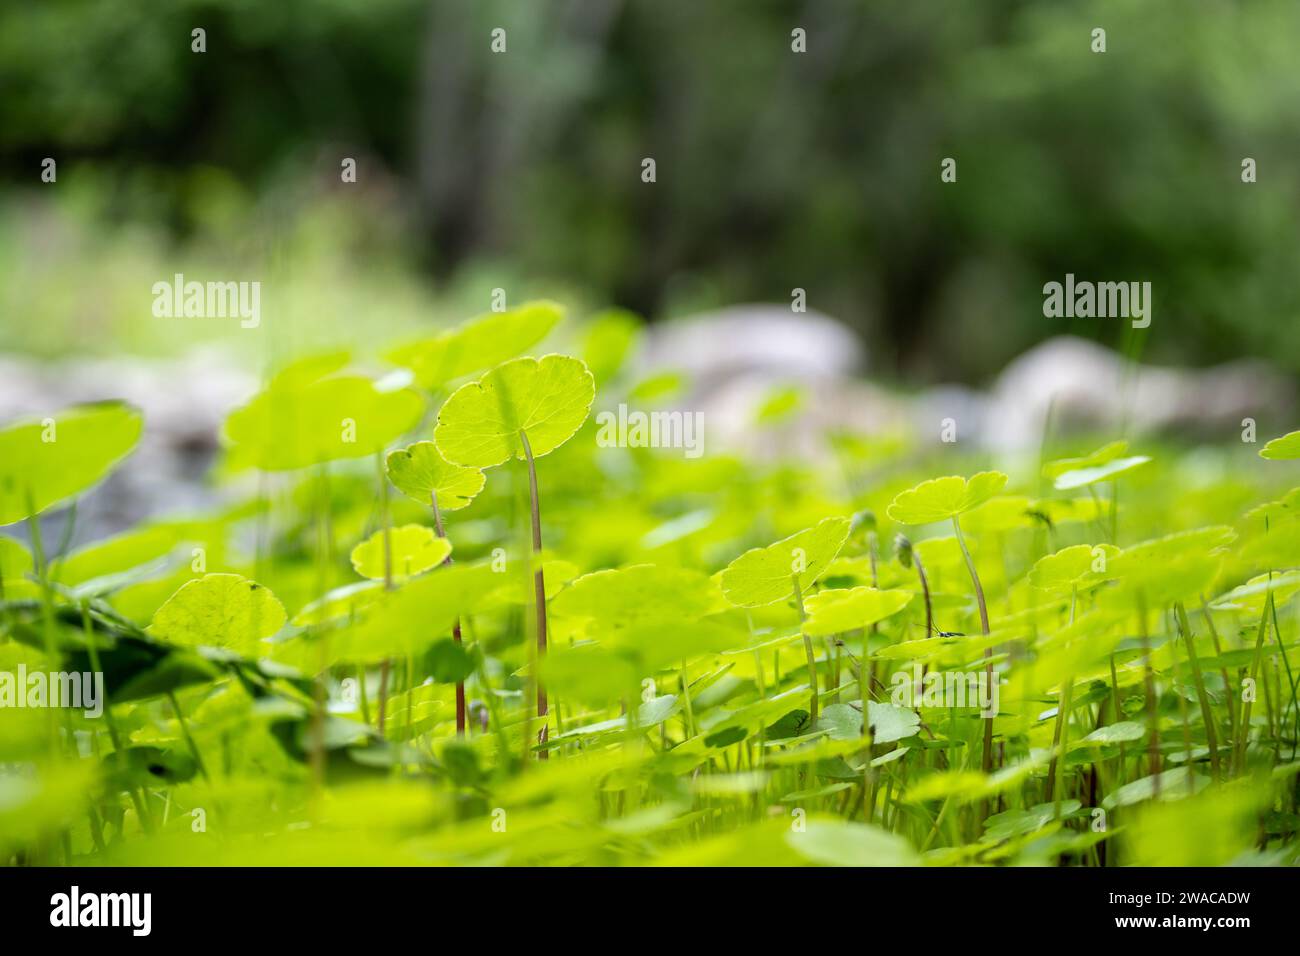 Hydrocotyle bonariensis grows naturally on the banks of a river. Stock Photo